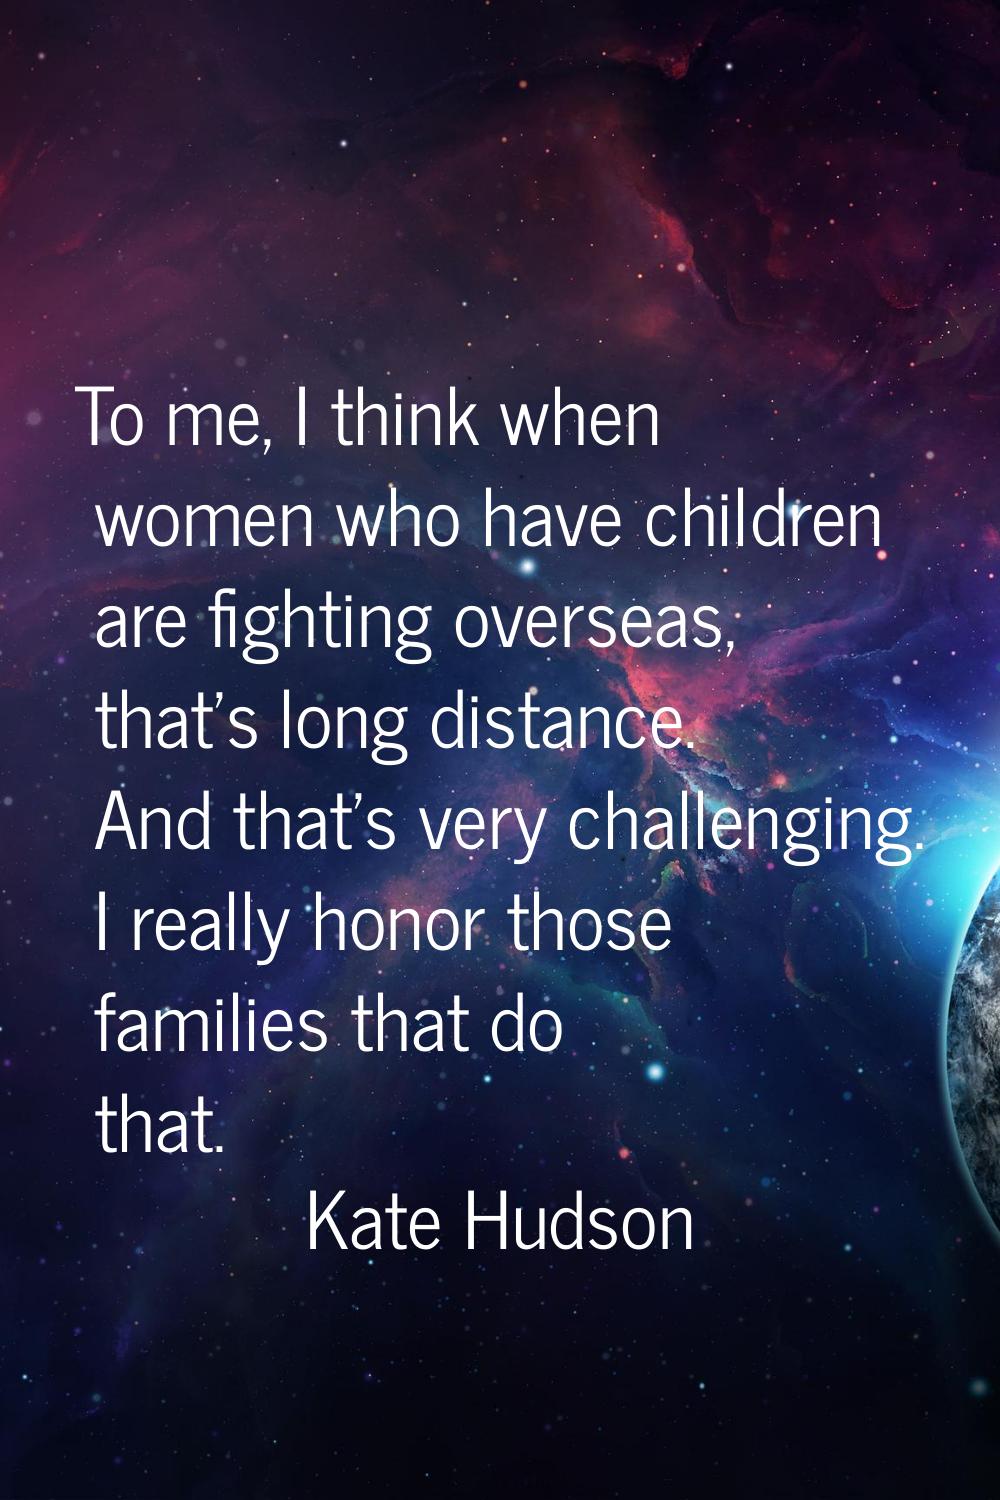 To me, I think when women who have children are fighting overseas, that's long distance. And that's